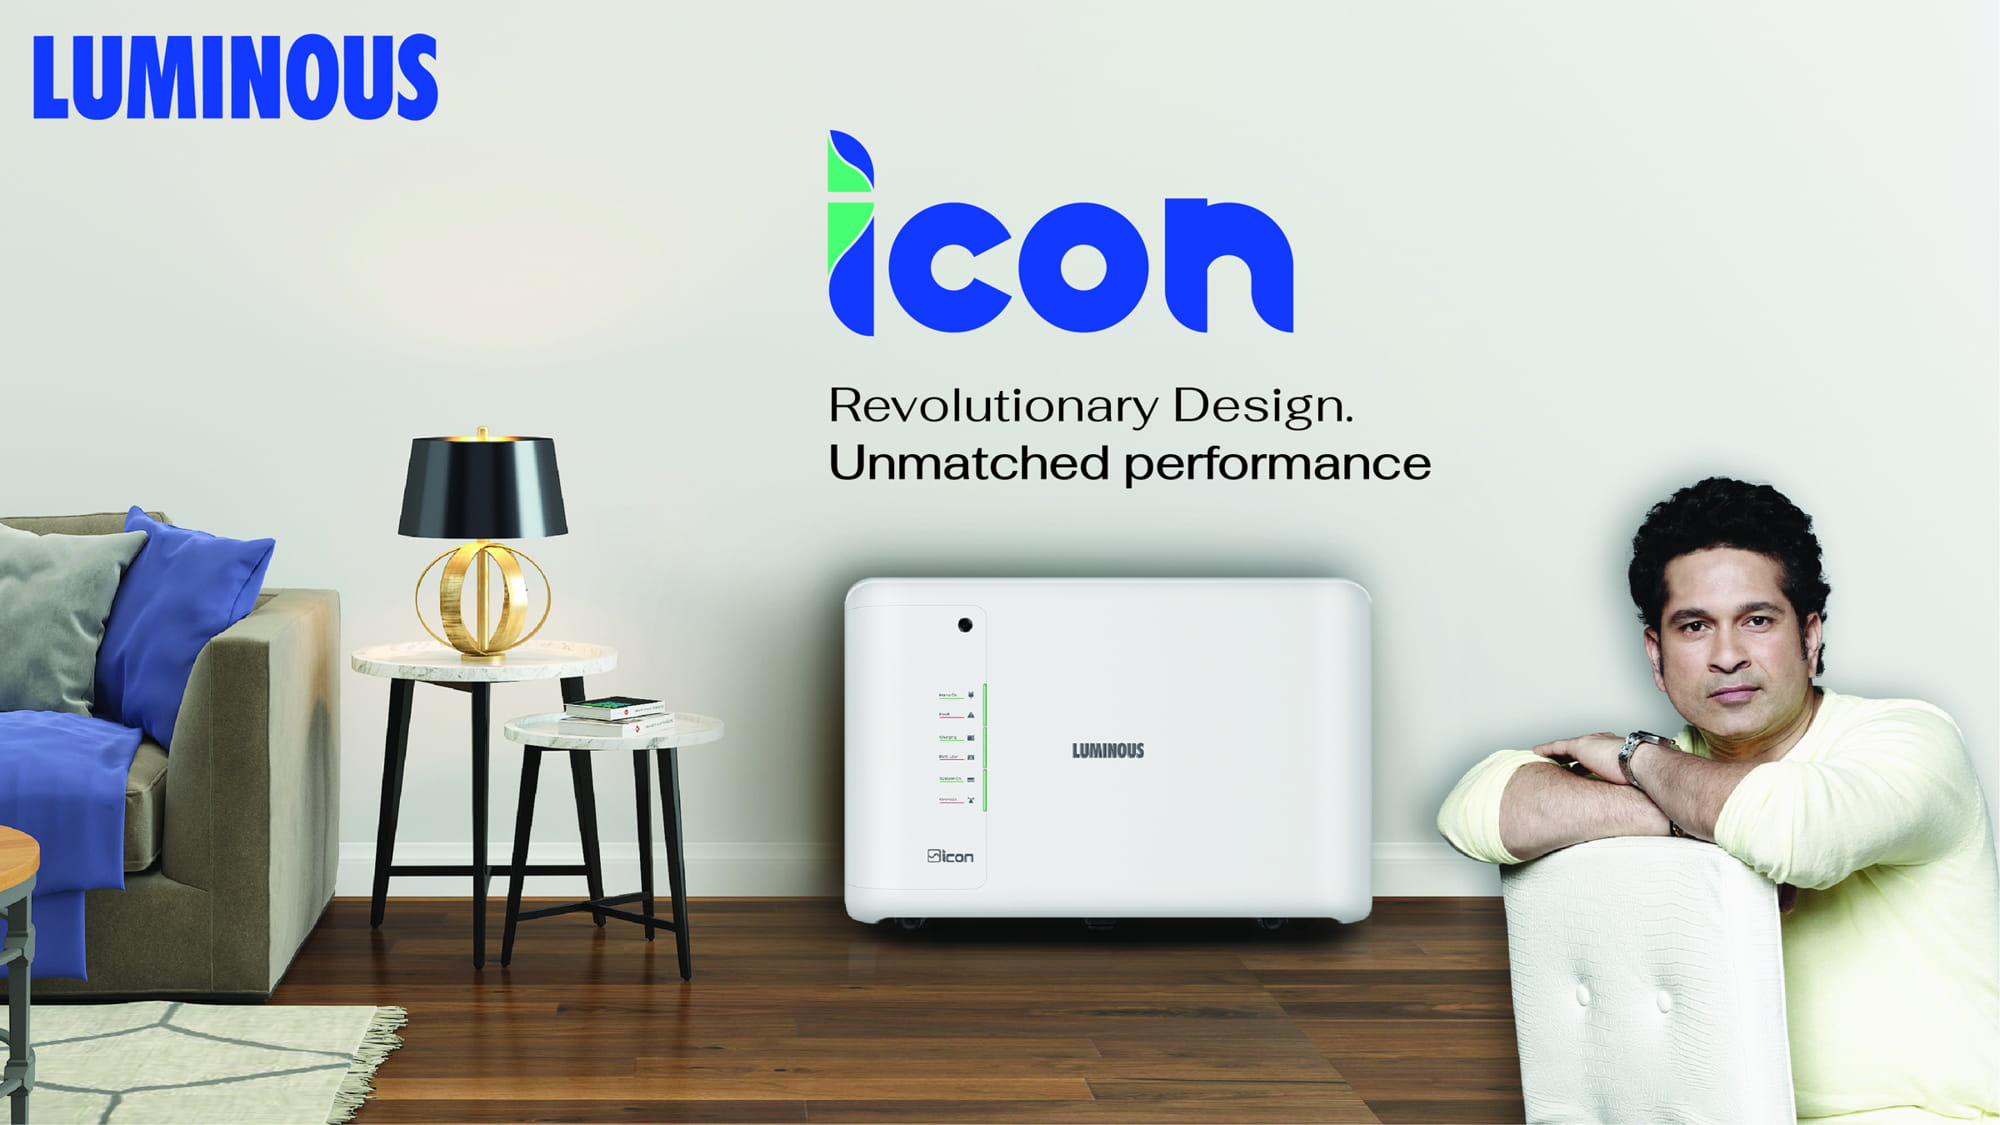 New Luminous iCon 1100 Inverter Launched in India